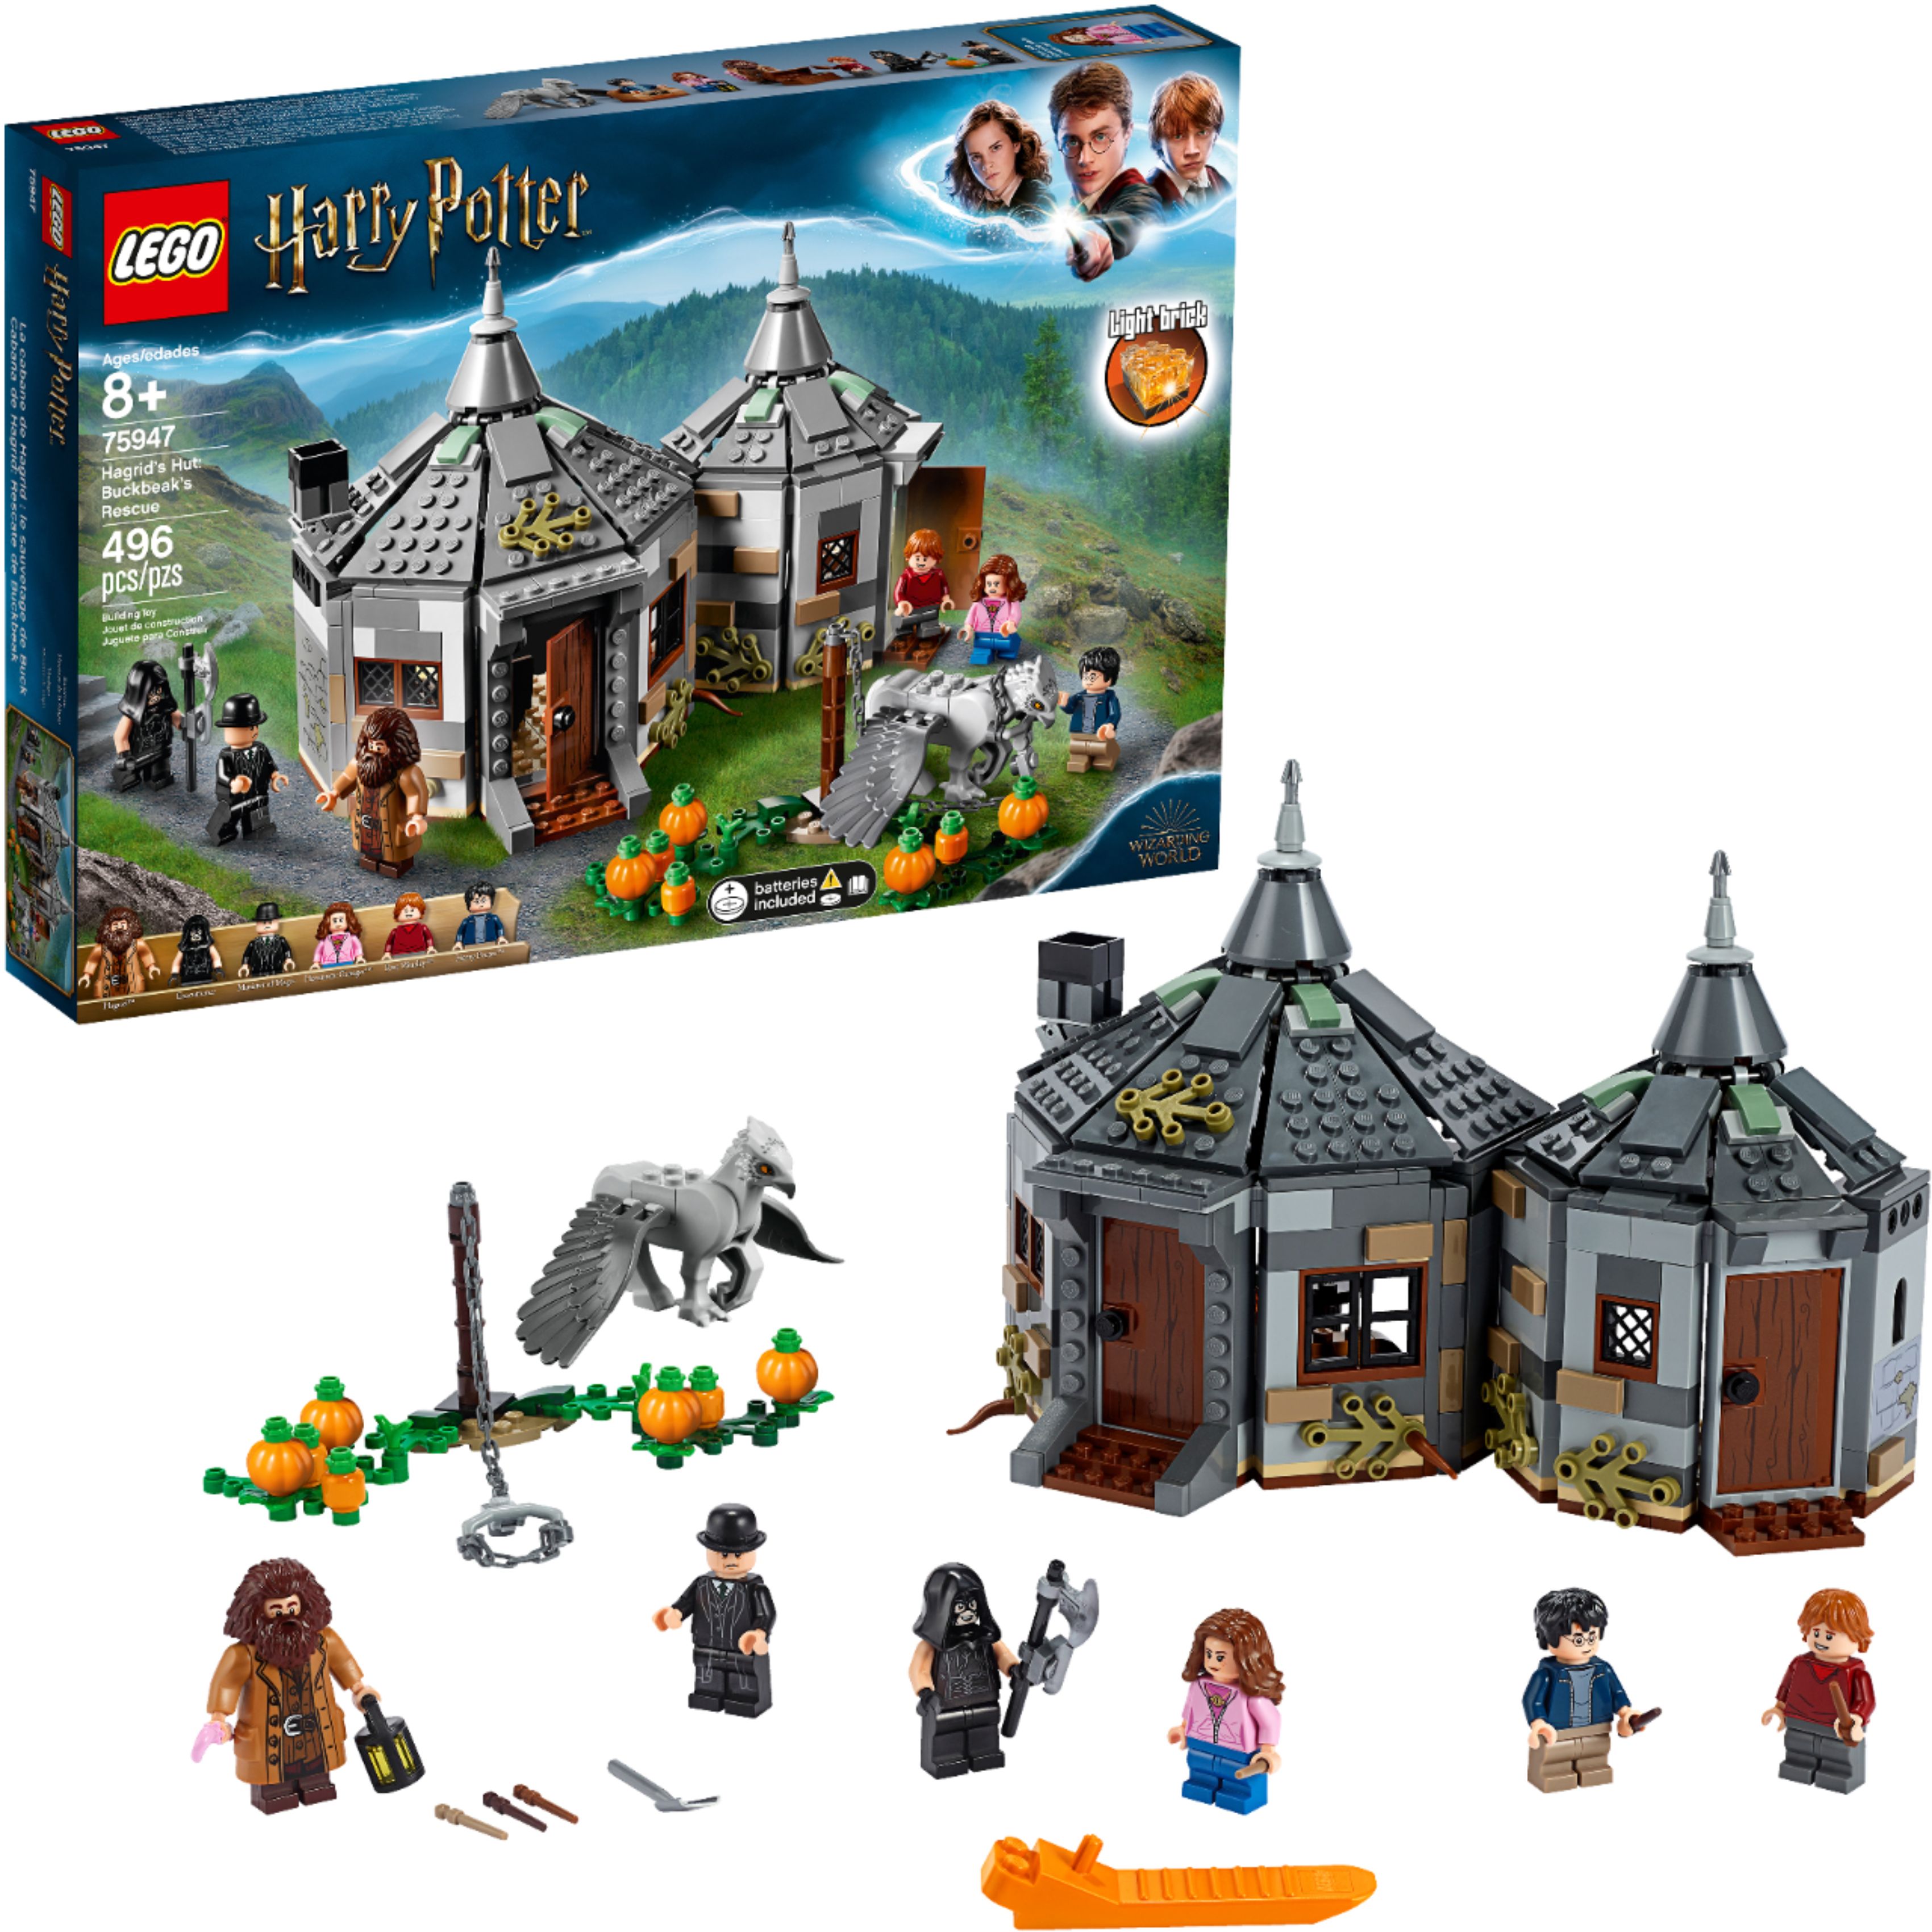 LEGO Harry Potter Ron Weasley Minifigure from 75947 